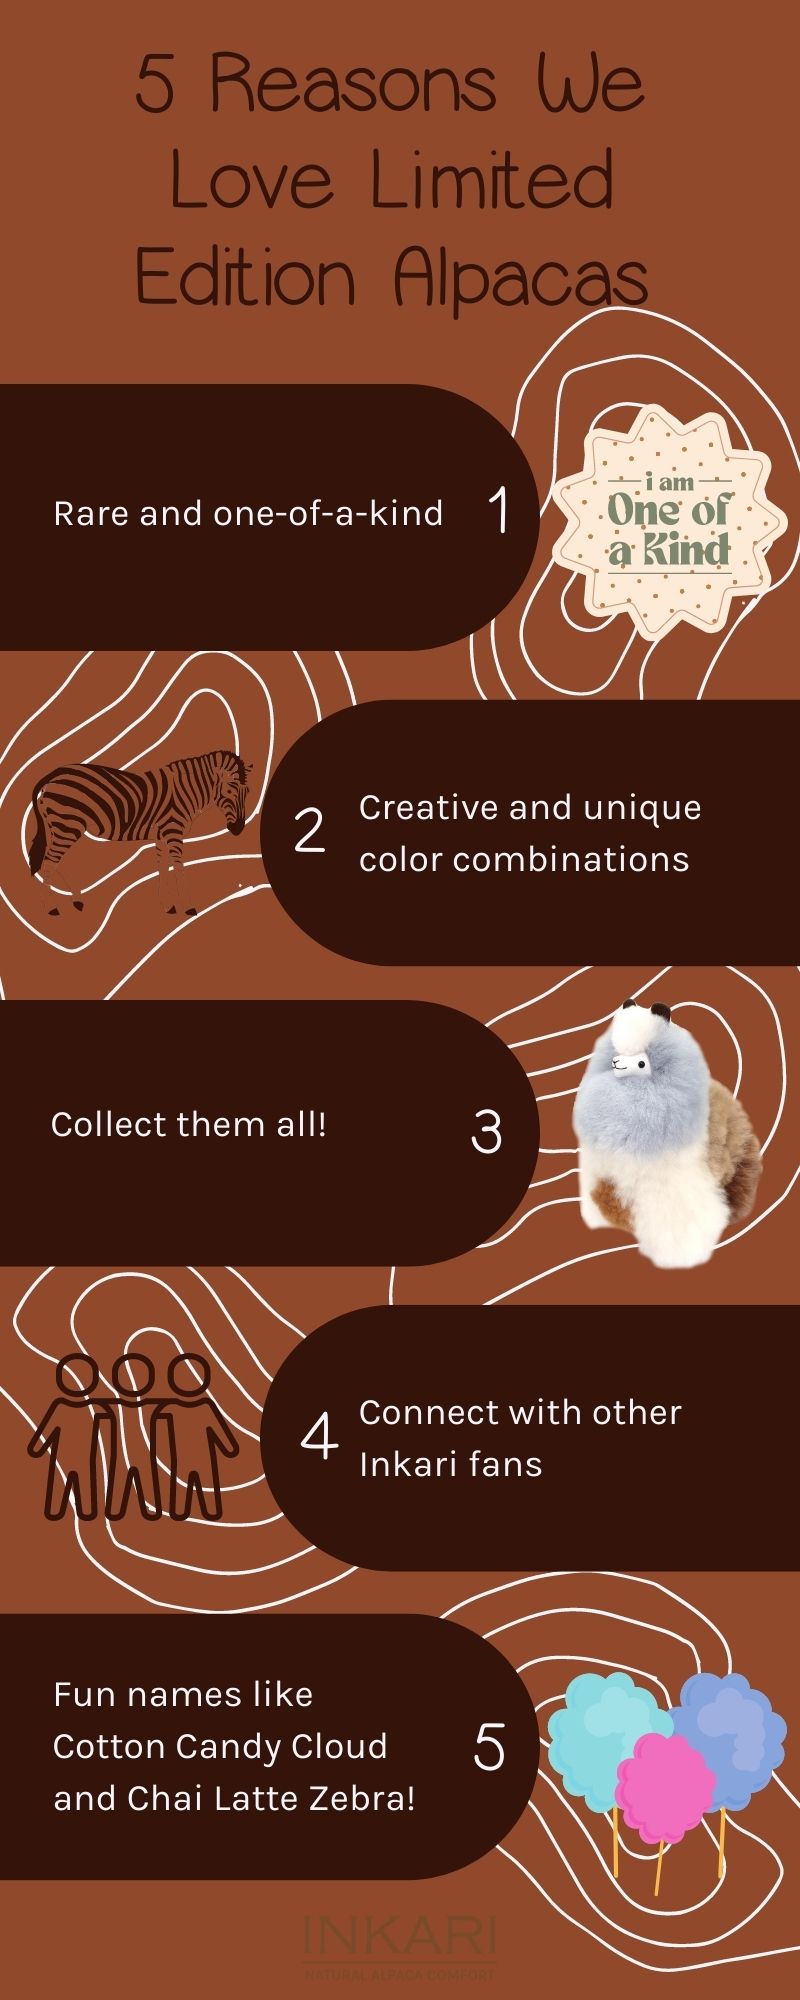 The Essential Maintenance Guide for Alpaca Wool Products